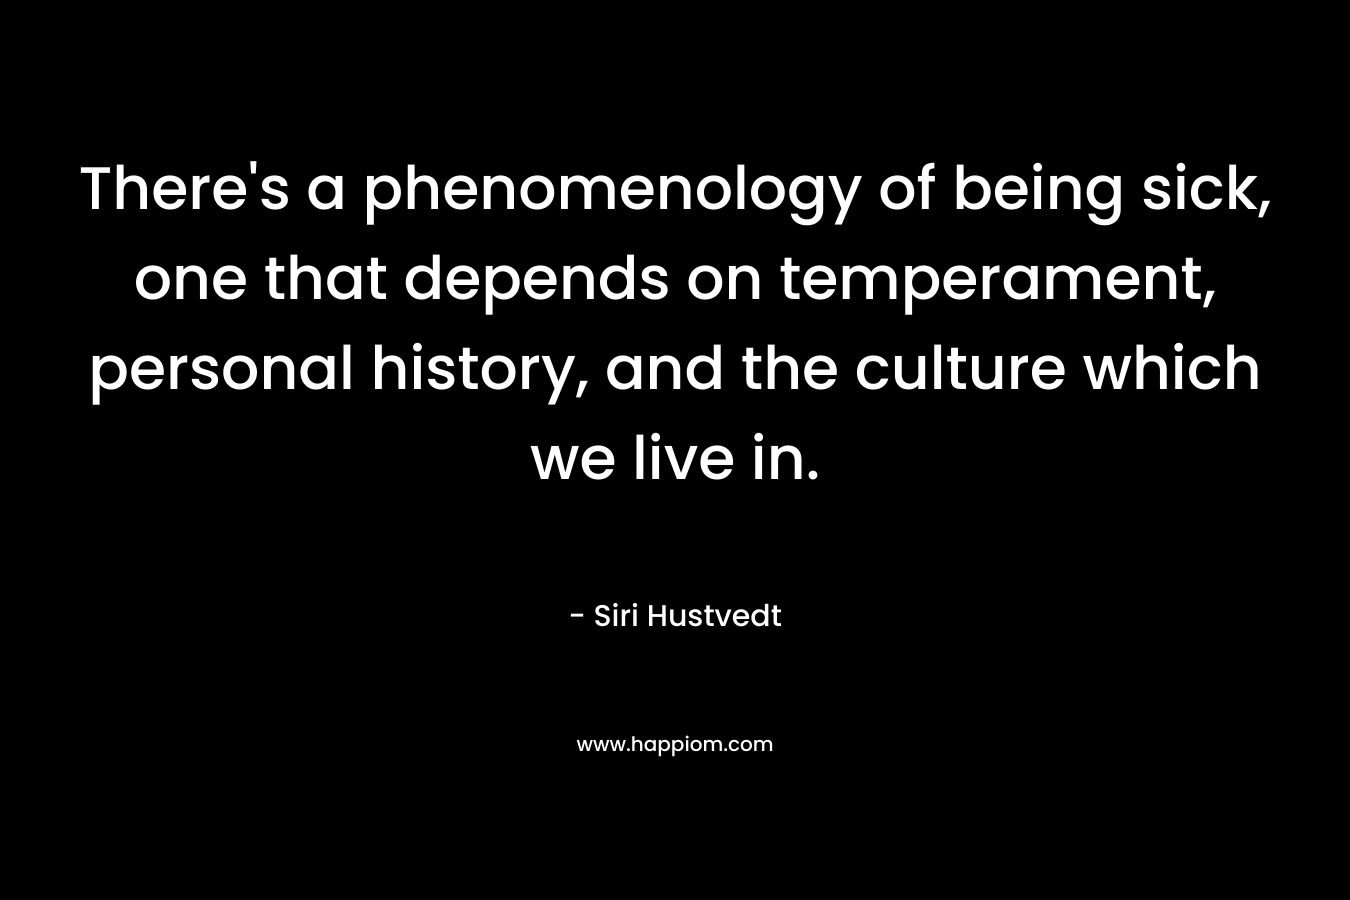 There's a phenomenology of being sick, one that depends on temperament, personal history, and the culture which we live in.